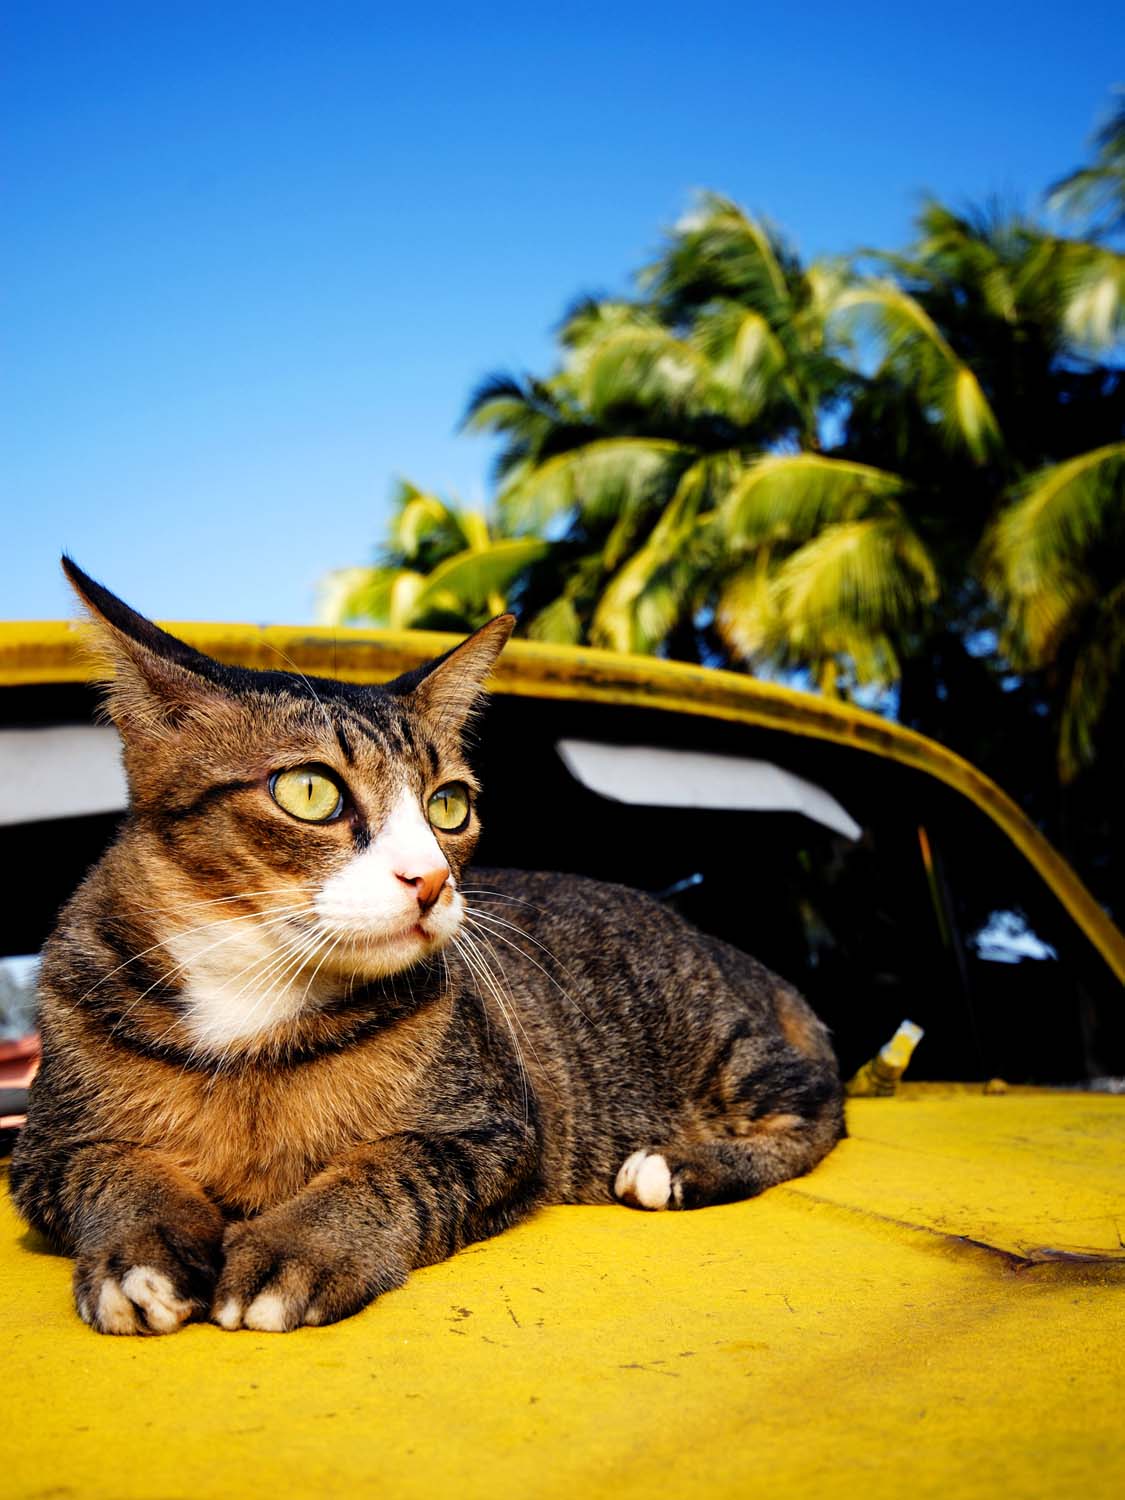 Cat Products Collection: A cat relaxing on an old classic car on a tropical island